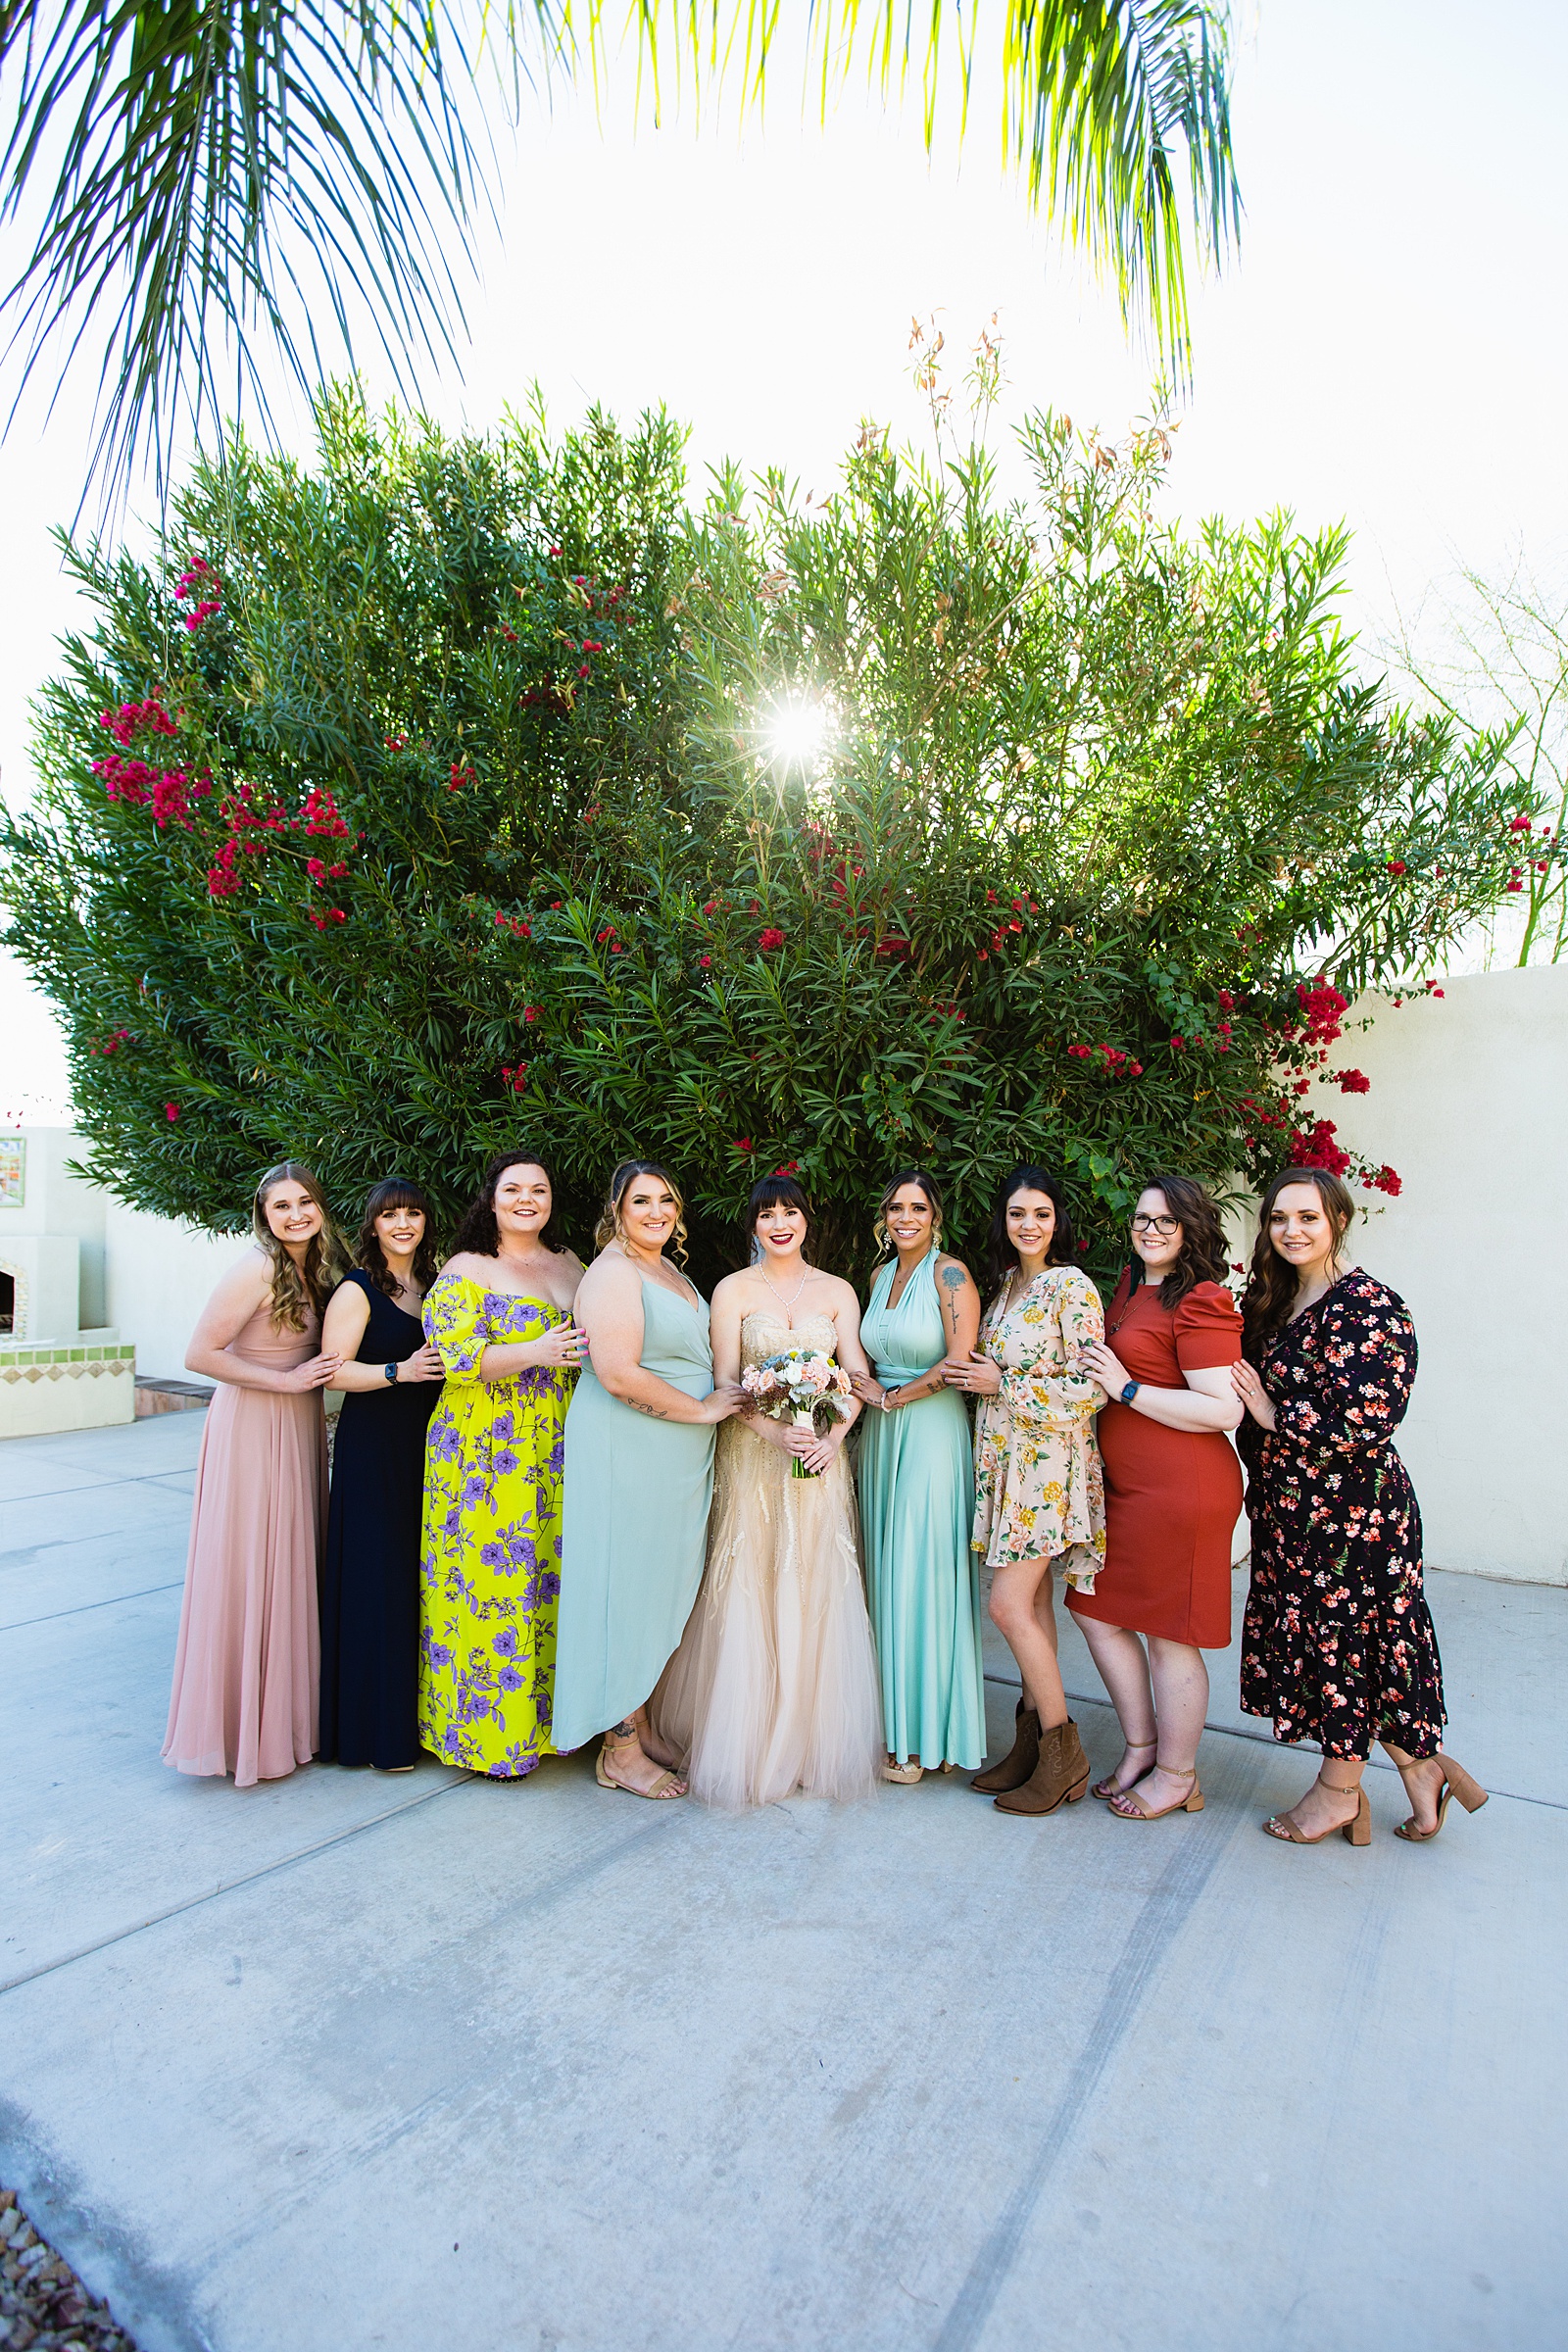 Bride and bridesmaids together at a Bella Rose Estate wedding by Arizona wedding photographer PMA Photography.